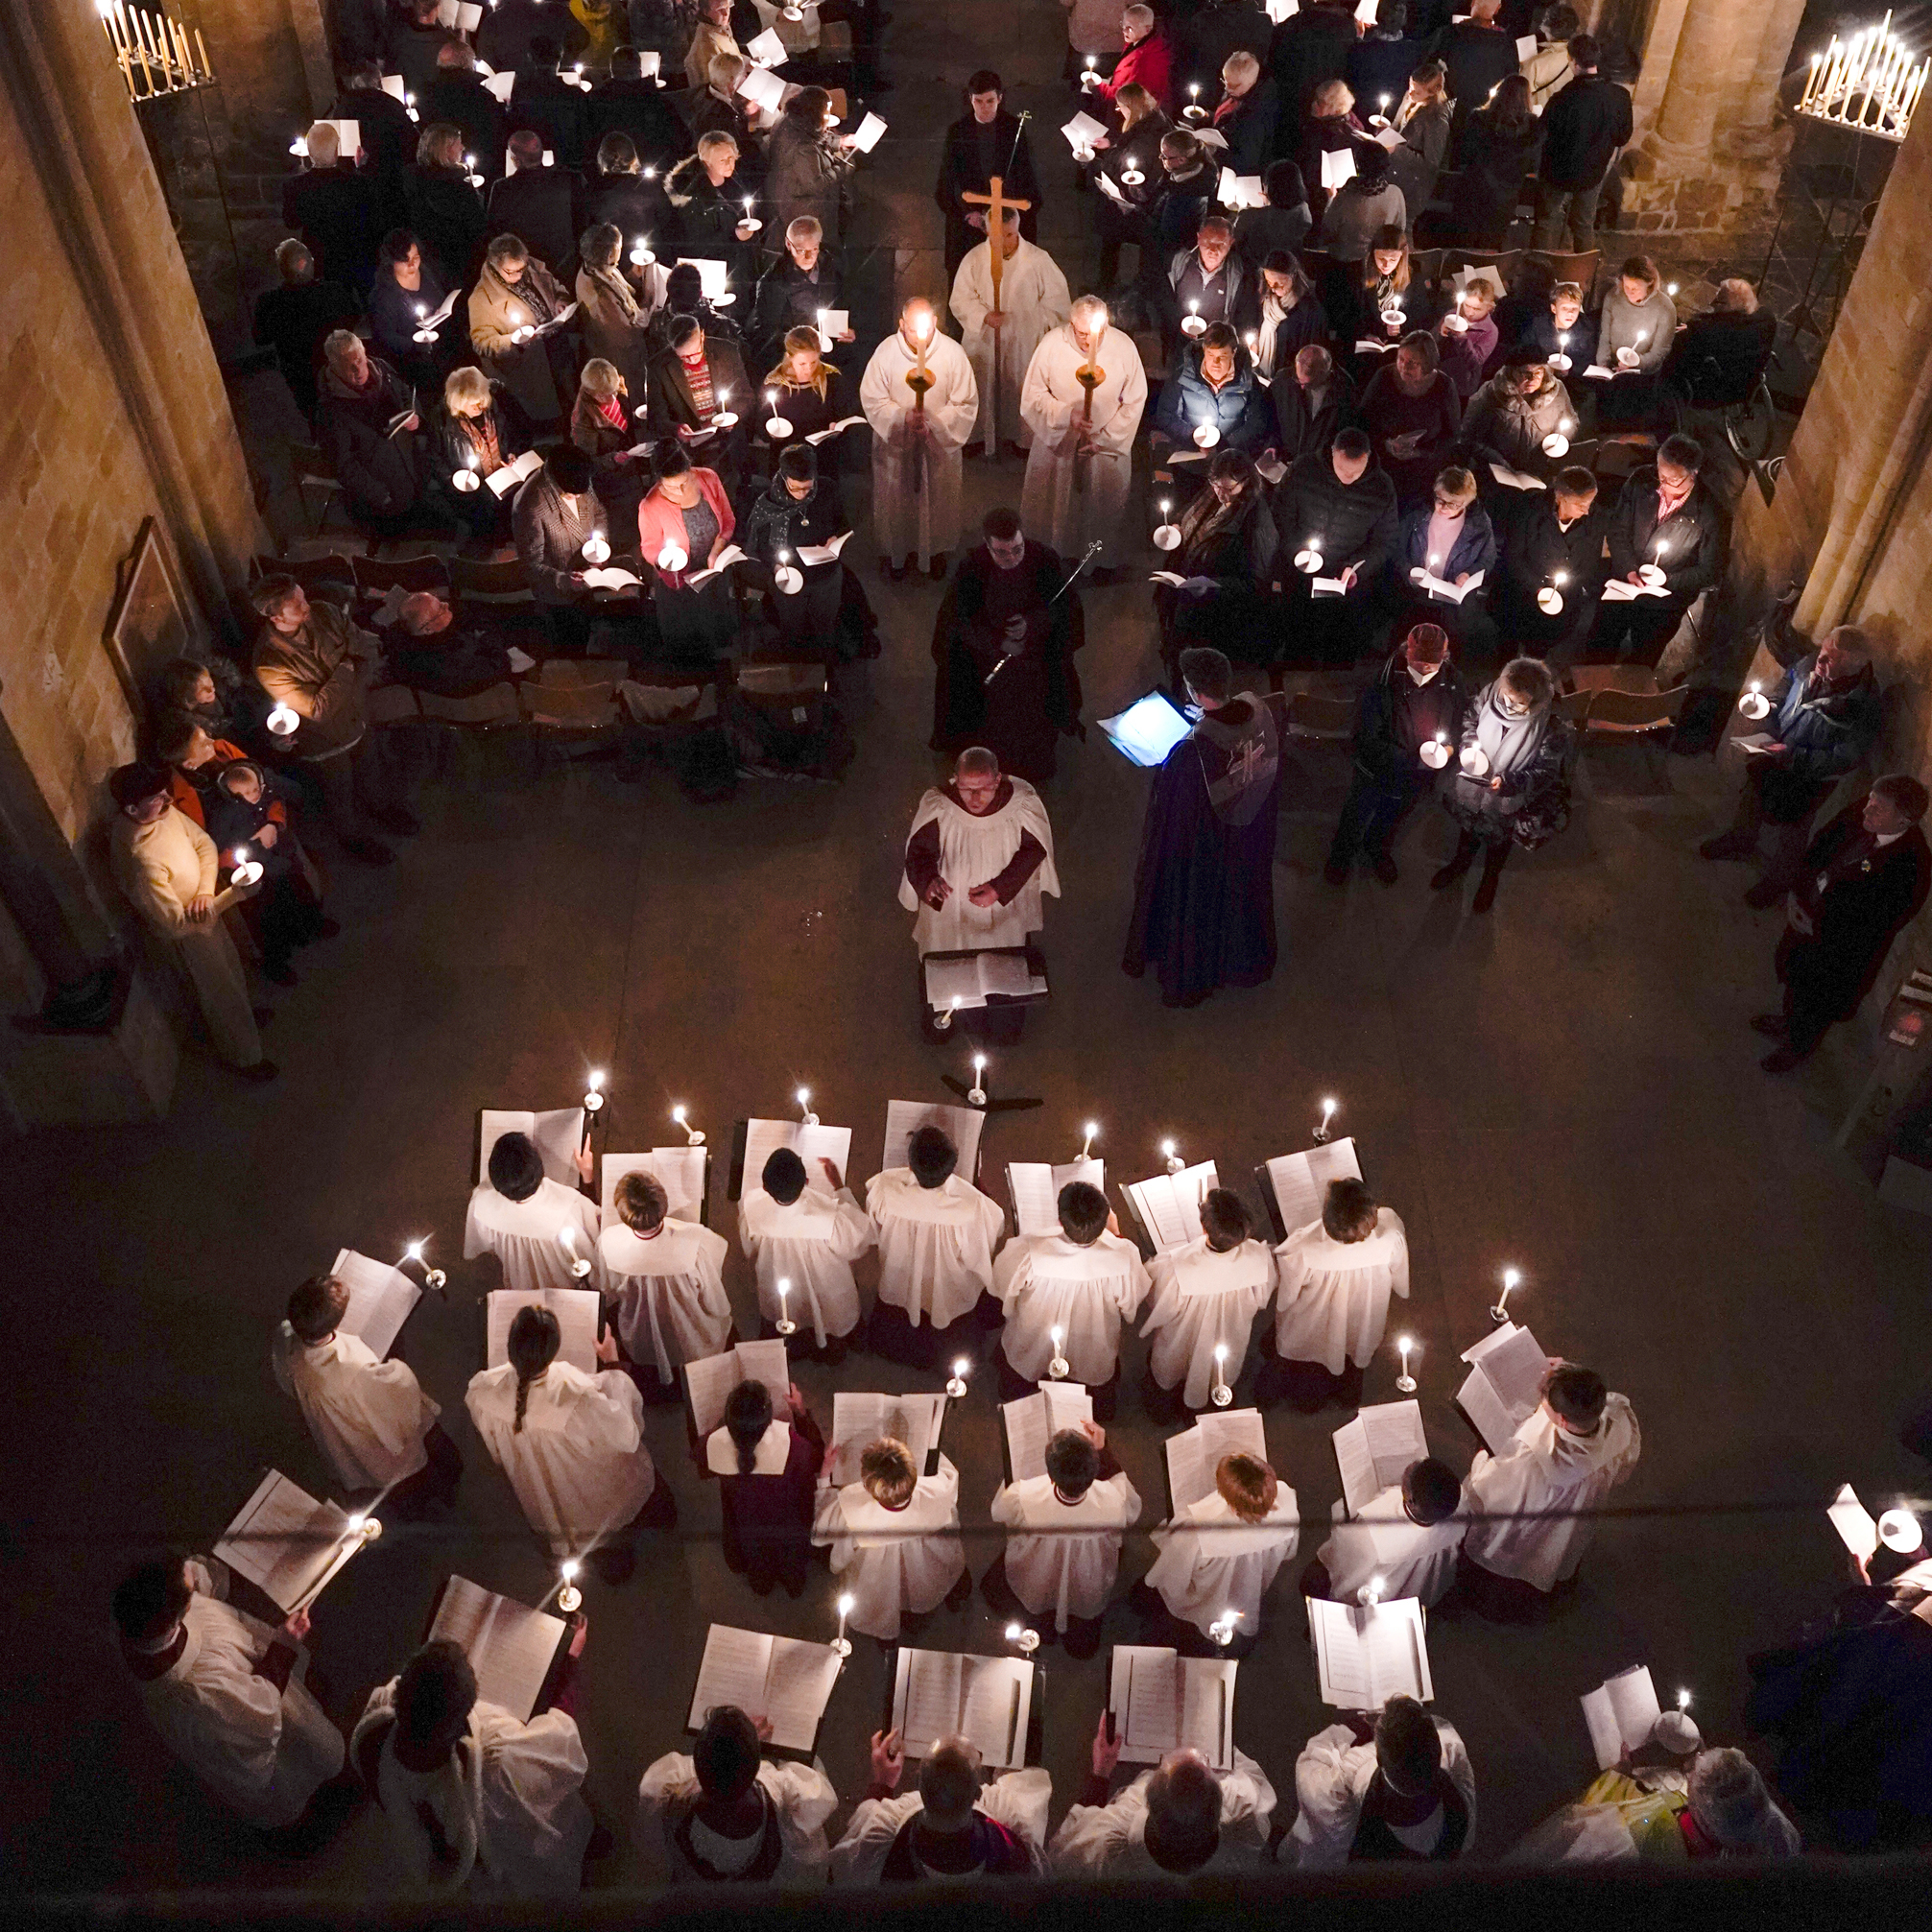 The choir from a birds eye view during the Advent Procession, holding candles